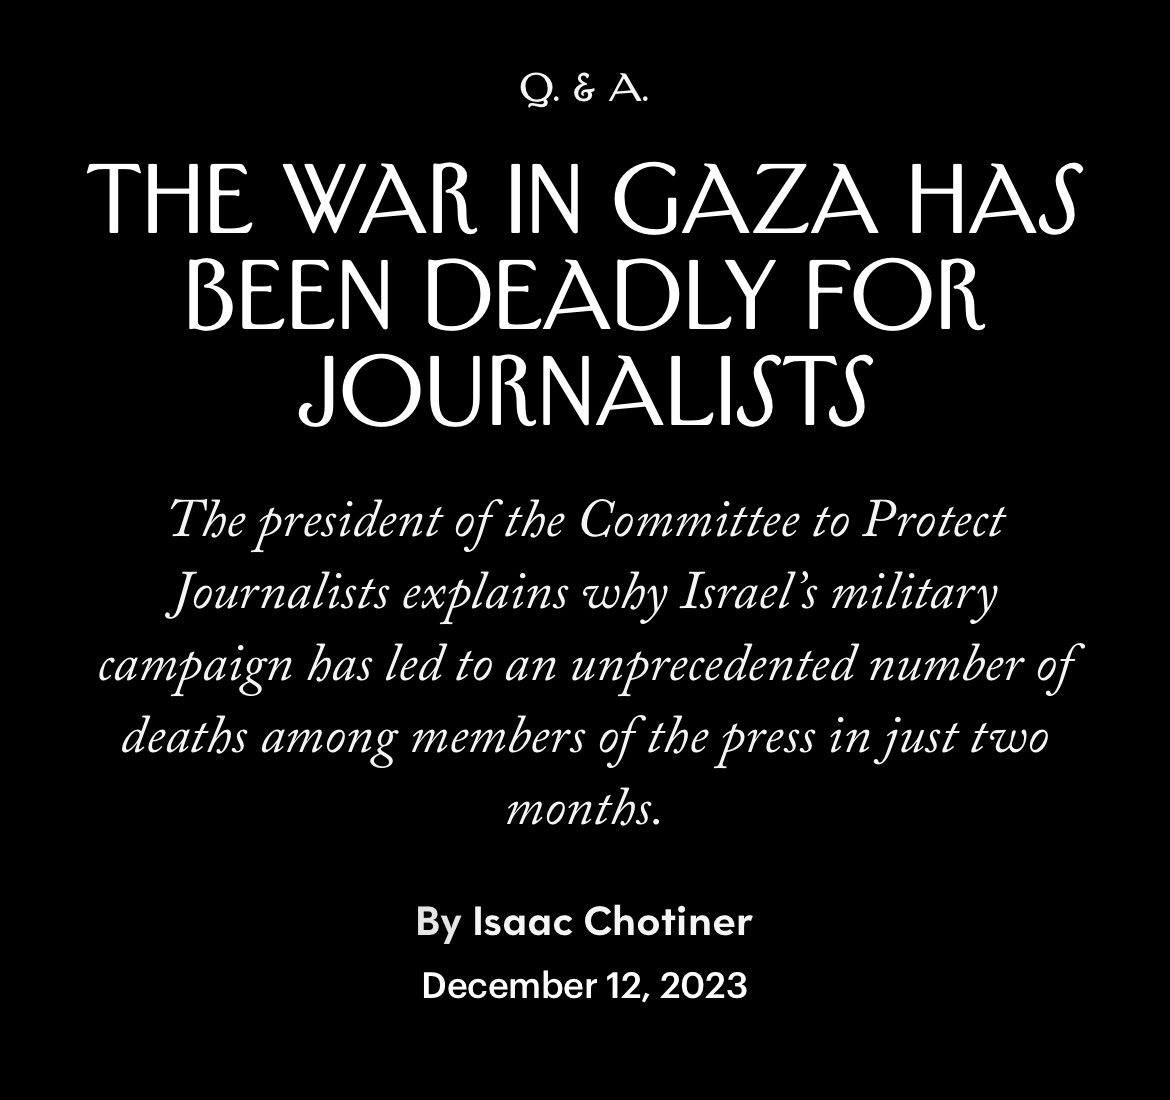 New Interview: I talked to Jodie Ginsberg, the president of the Committee to Protect Journalists, about Israel’s bombing campaign in Gaza, which has caused an unprecedented number of journalist deaths for a conflict barely two months old. newyorker.com/news/q-and-a/t…